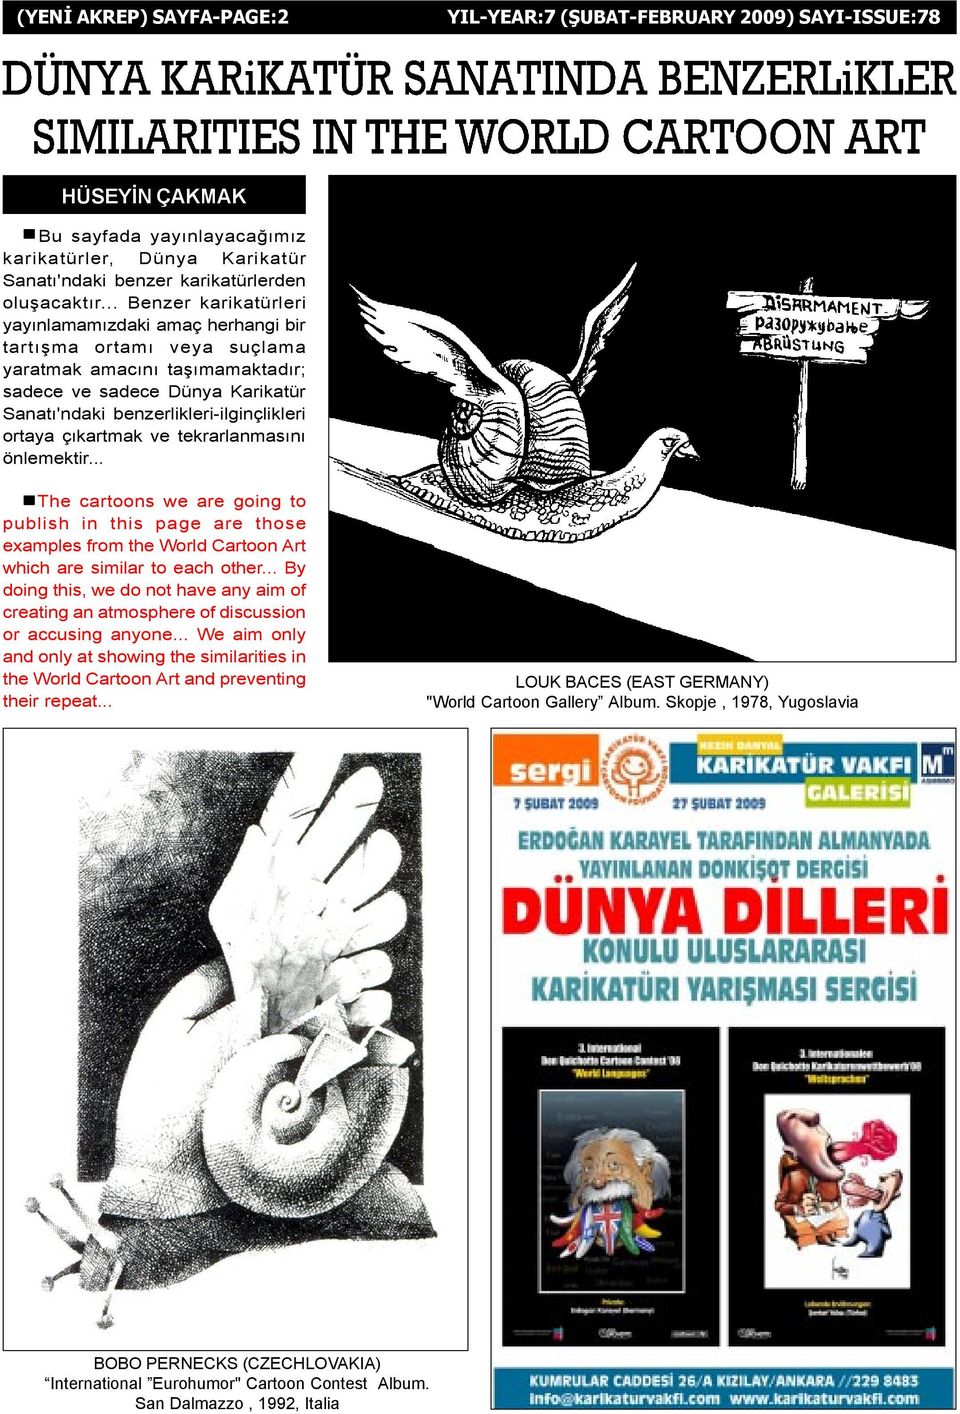 ortaya çýkartmak ve tekrarlanmasýný önlemektir... nthe cartoons we are going to publish in this page are those examples from the World Cartoon Art which are similar to each other.